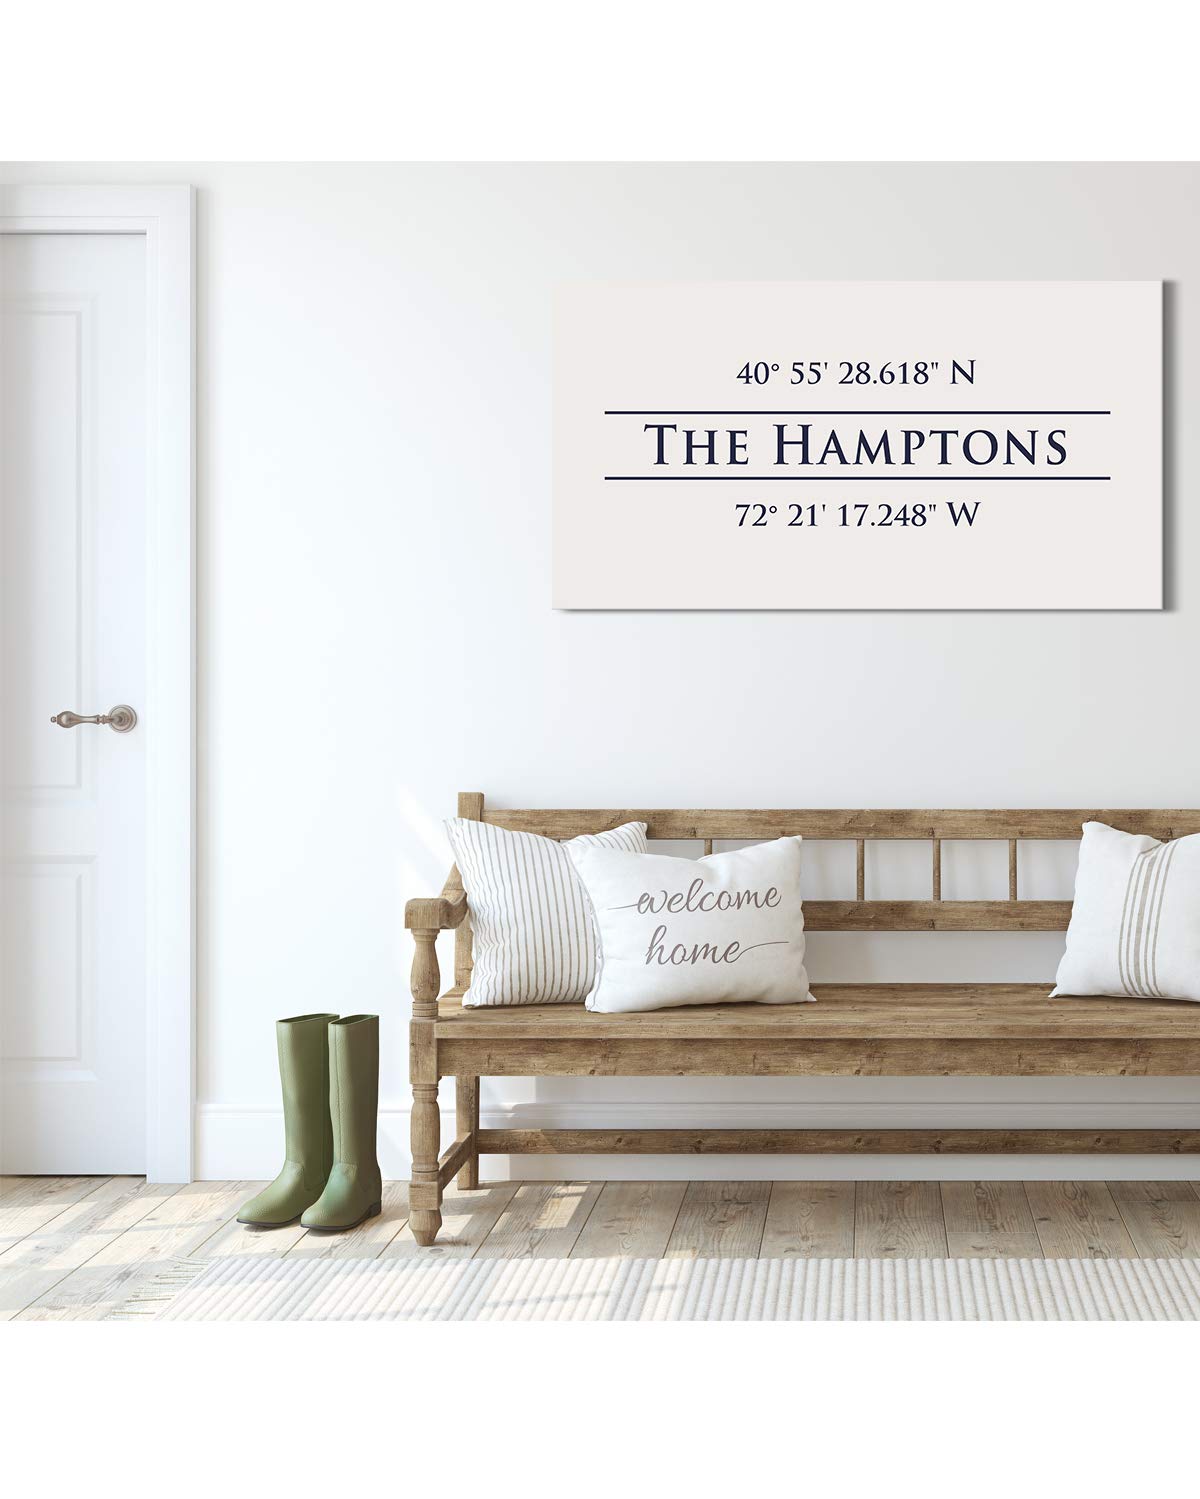 The Hamptons 40° 55' 28.618" N, 72° 21' 17.248" W - Wall Decor Art Canvas with an offwhite background - Ready to Hang - Great for above a couch, table, bed or more